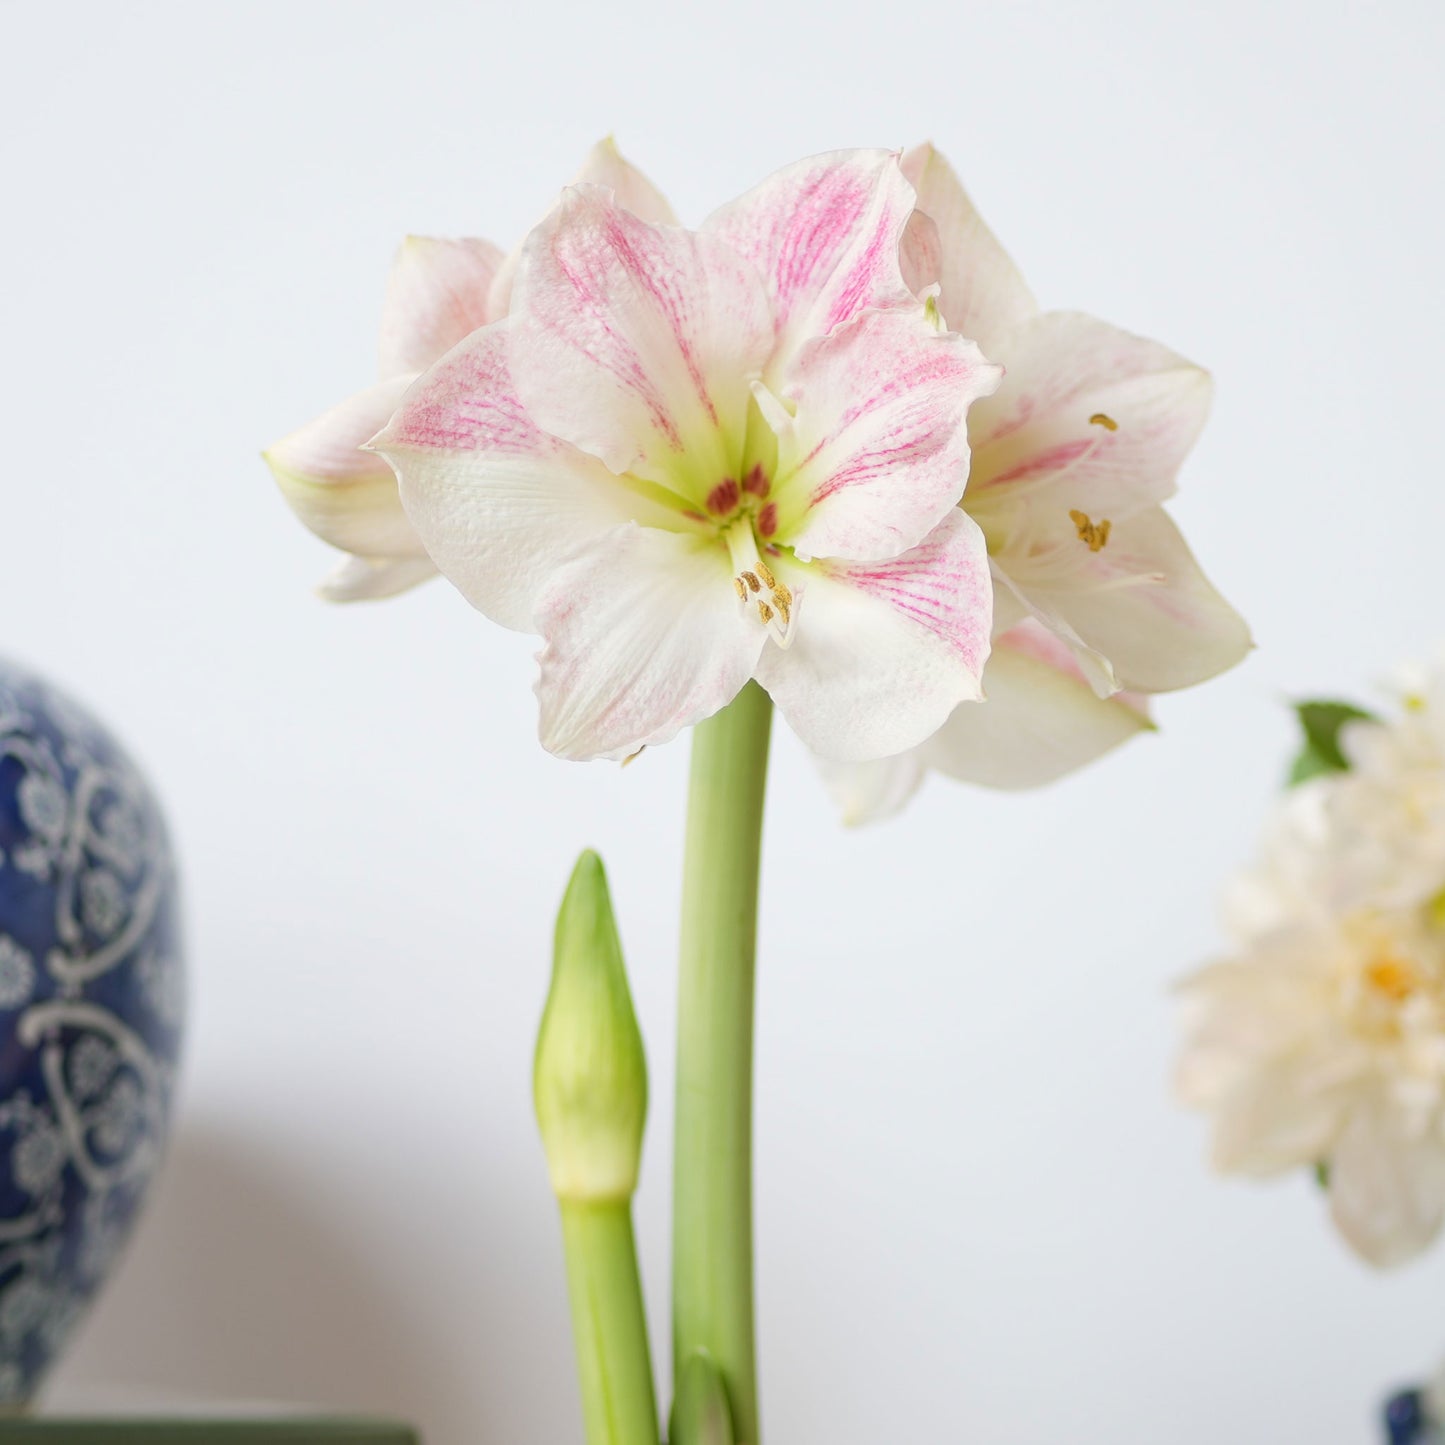 amaryllis blue wax with white blooms